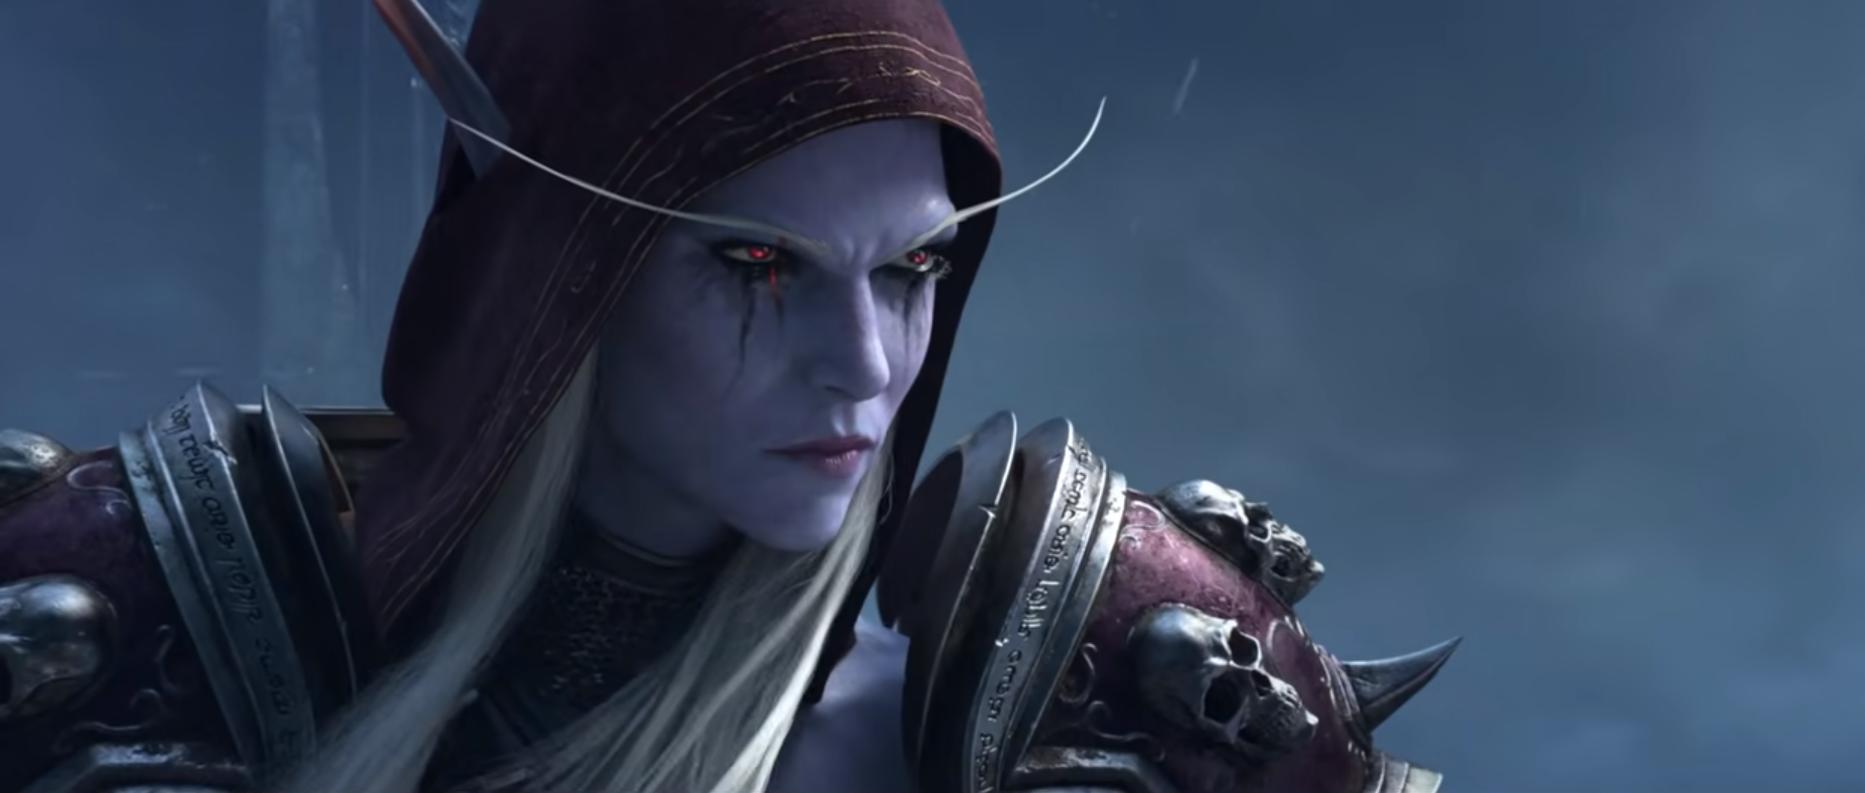 Players have already had a taste of what Shadowlands has to offer after Sylvanas and the Lich King clashed in a cinematic trailer.